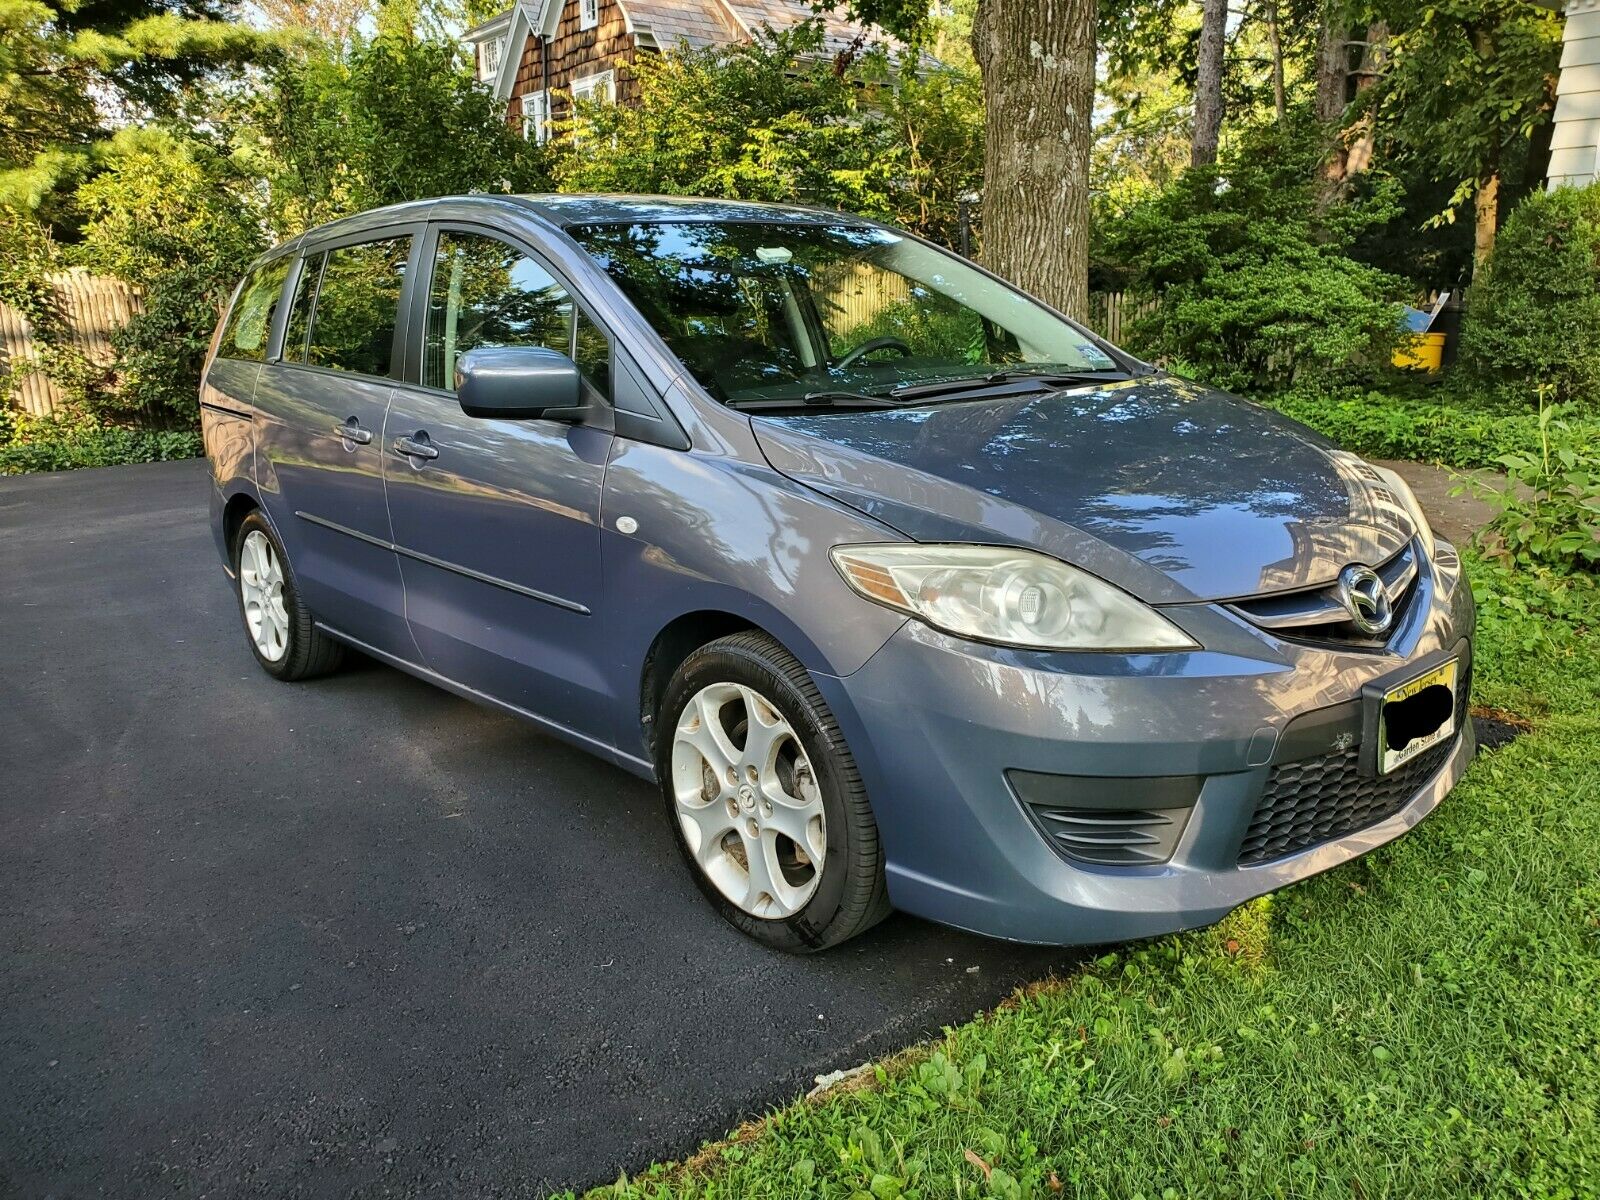 2009 Mazda Mazda5 Sport 2009 Mazda5, Sport, Automatic, Low Mileage 70,560, Well Maintained